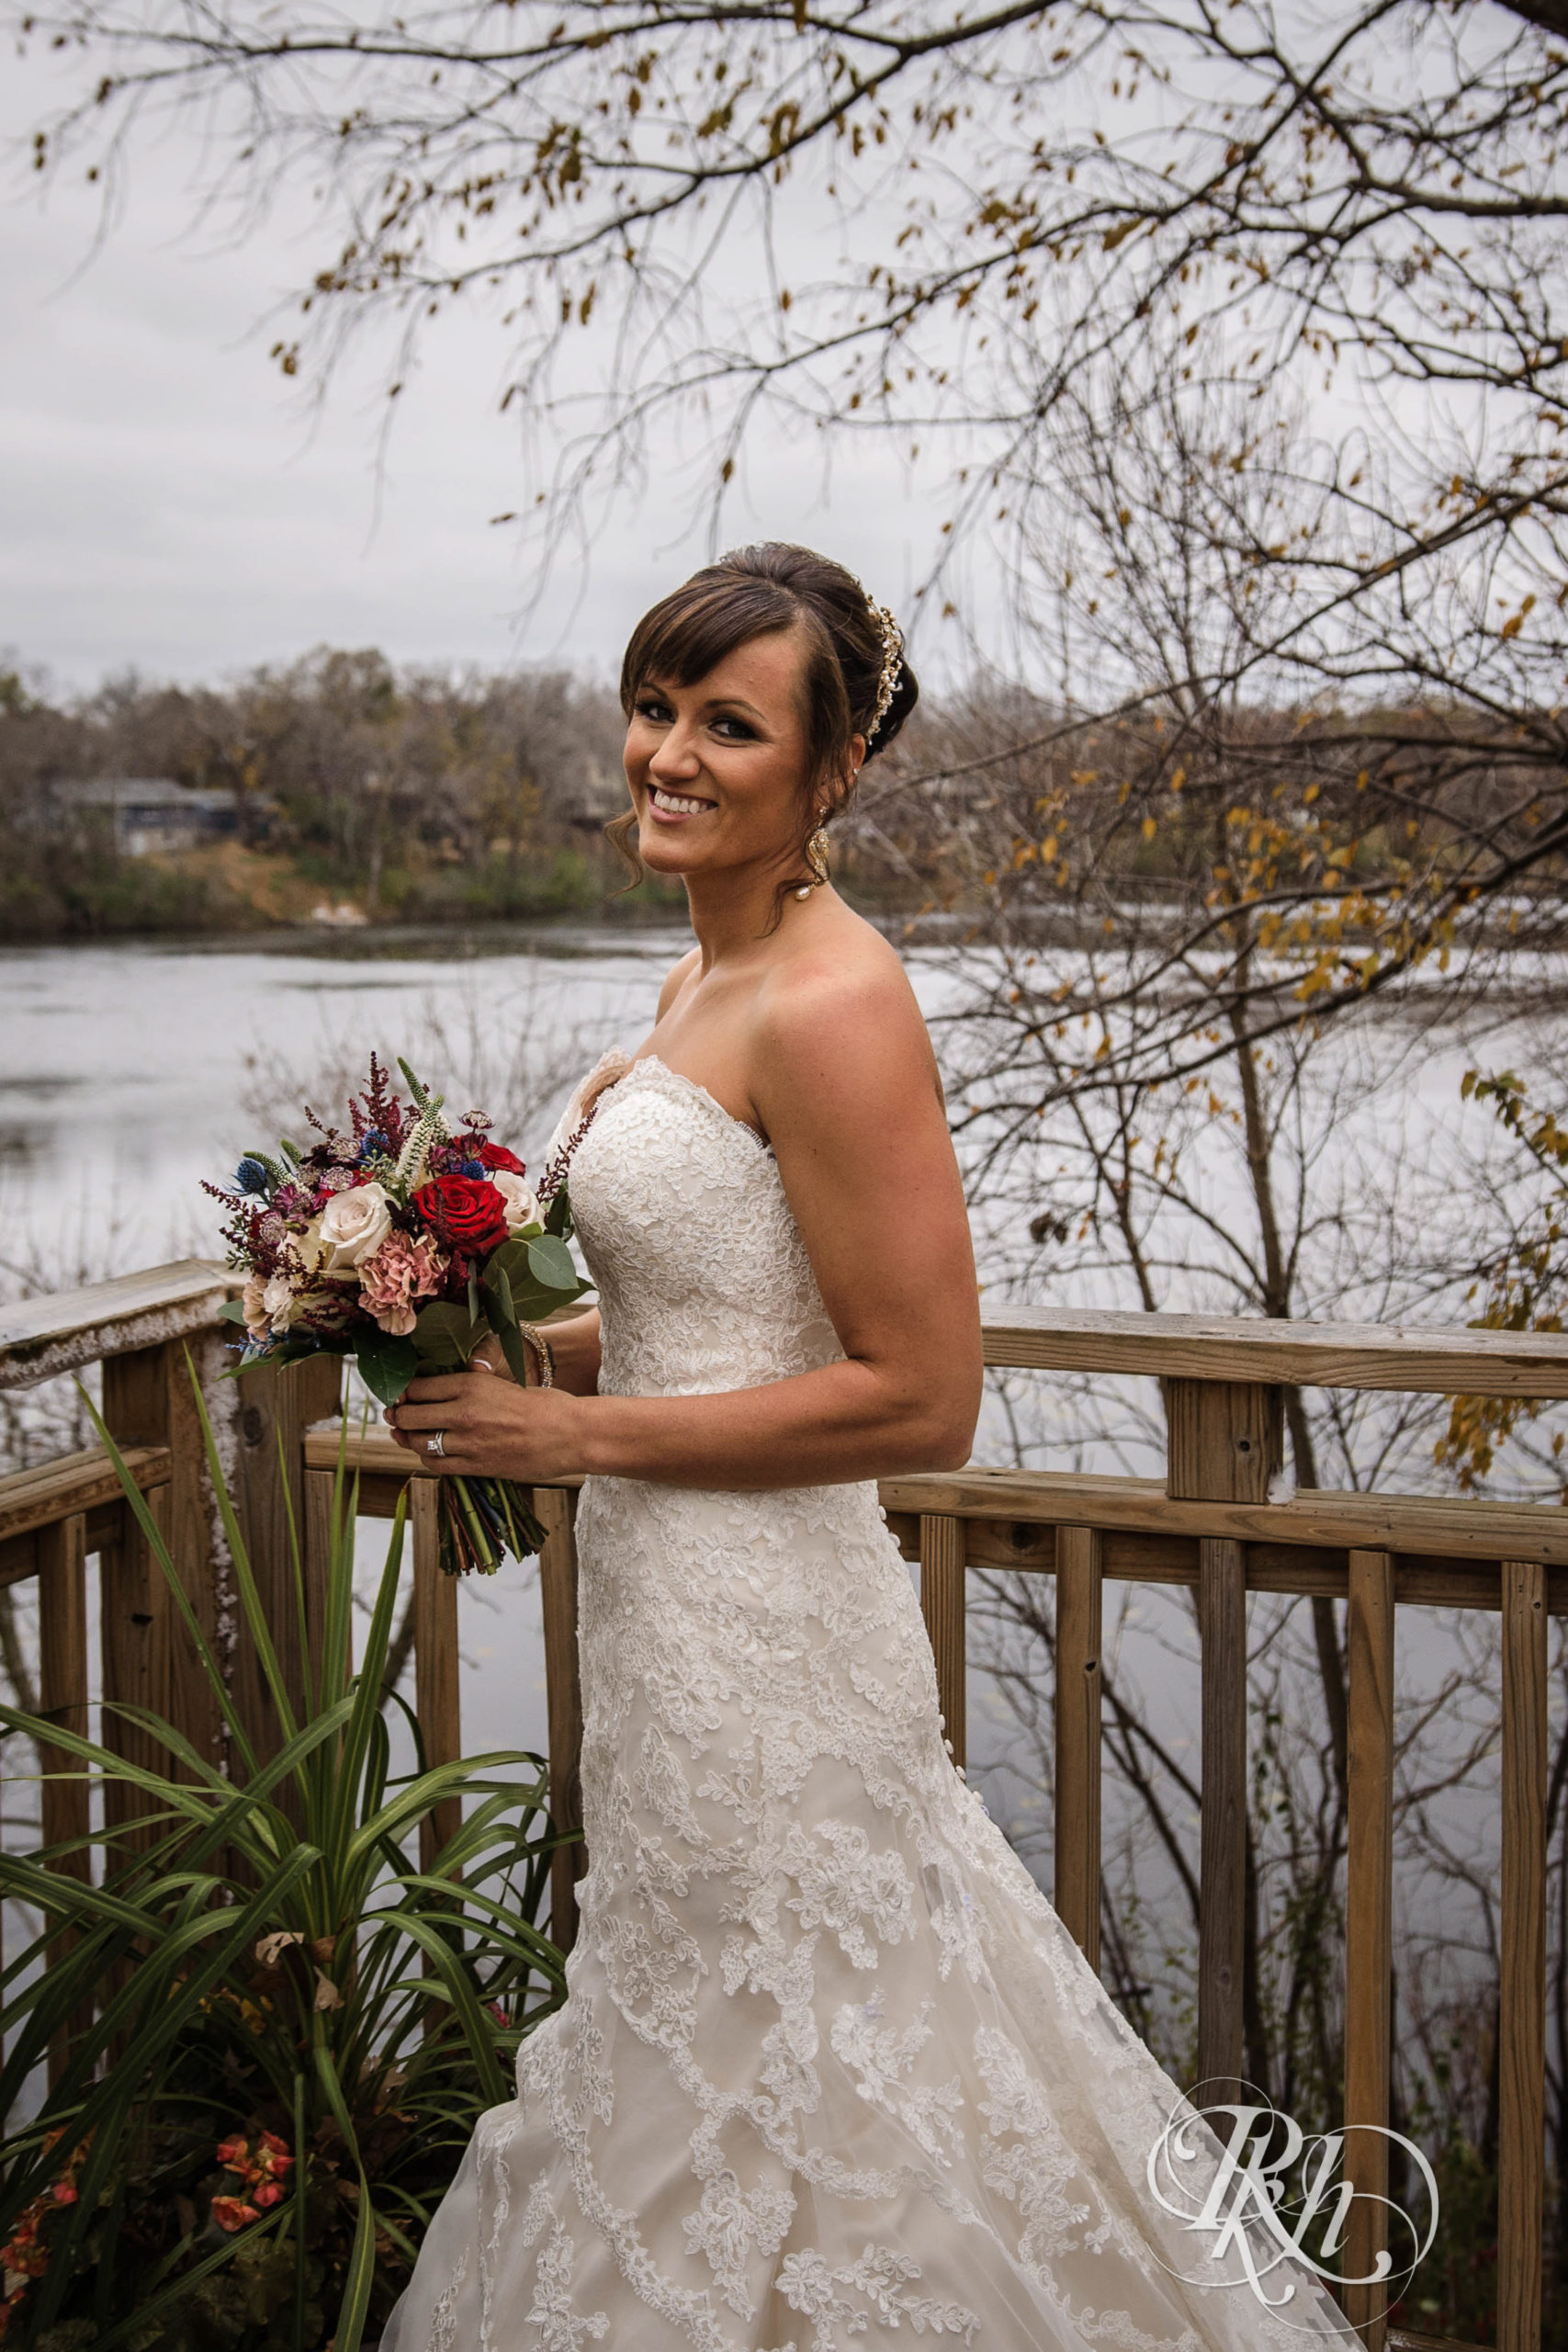 Bride smiles with flowers outside at church wedding in Minneapolis, Minnesota.